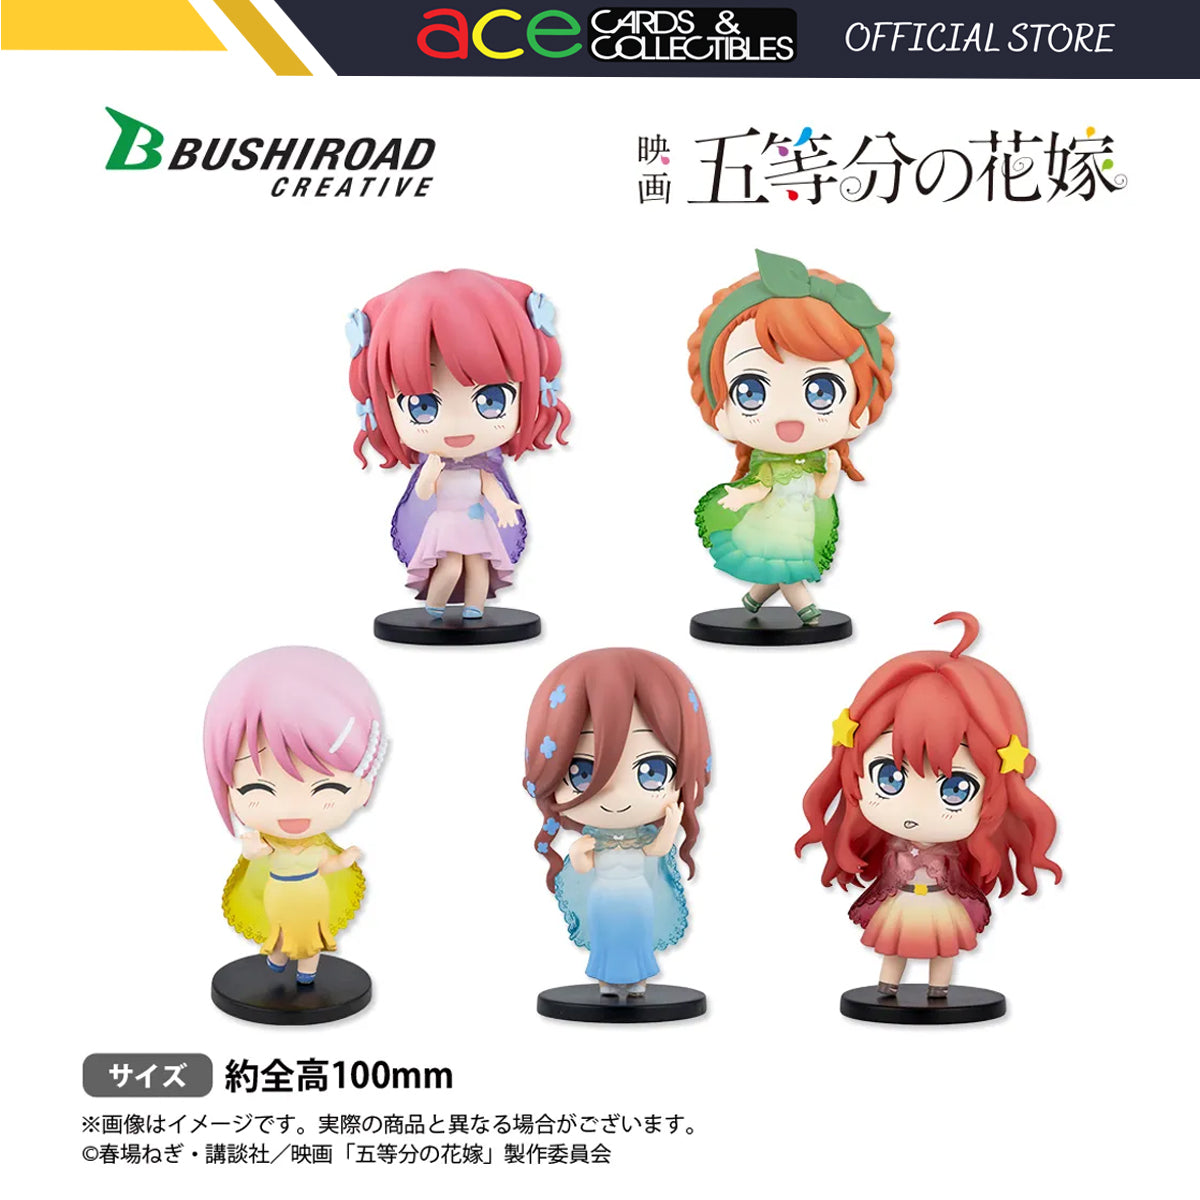 The Quintessential Quintuplets Movie Trading Figure &quot;Rainy Days&quot;-Single Box (Random)-Bushiroad Creative-Ace Cards &amp; Collectibles